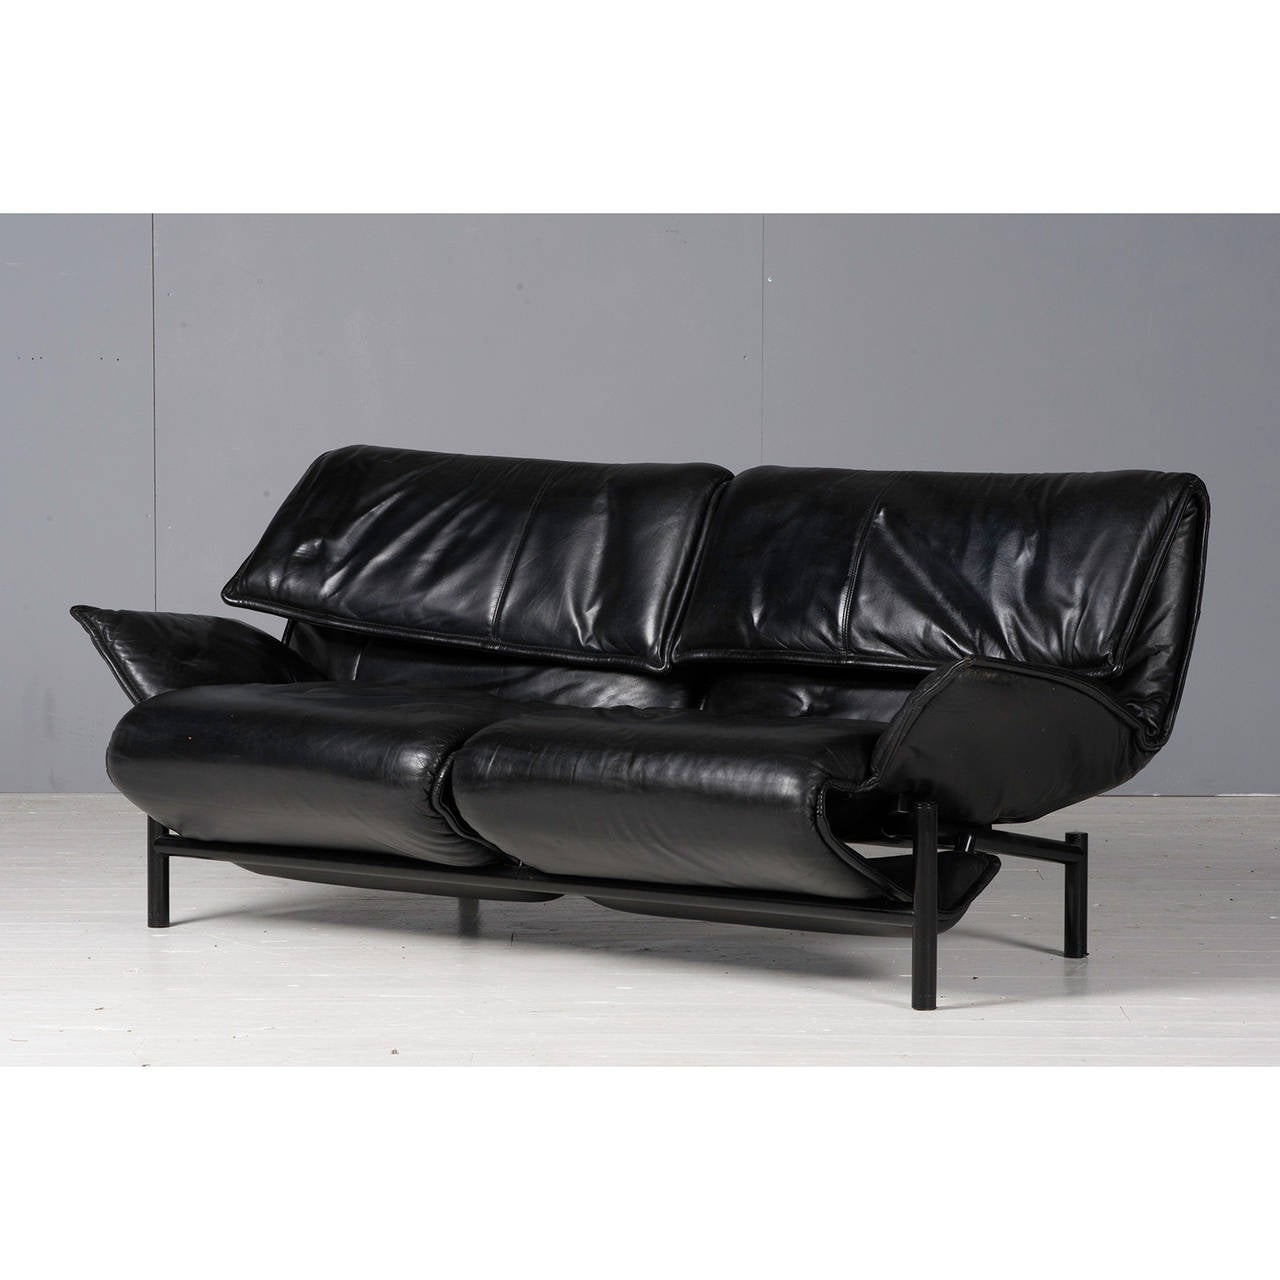 The 'Veranda' Sofa designed by Vico Magistretti for Cassina in 1983. This sculptural chair can be adjusted into several positions using a spring mechanism and operated by a control lever with folding headrest. Original leather black upholstery,